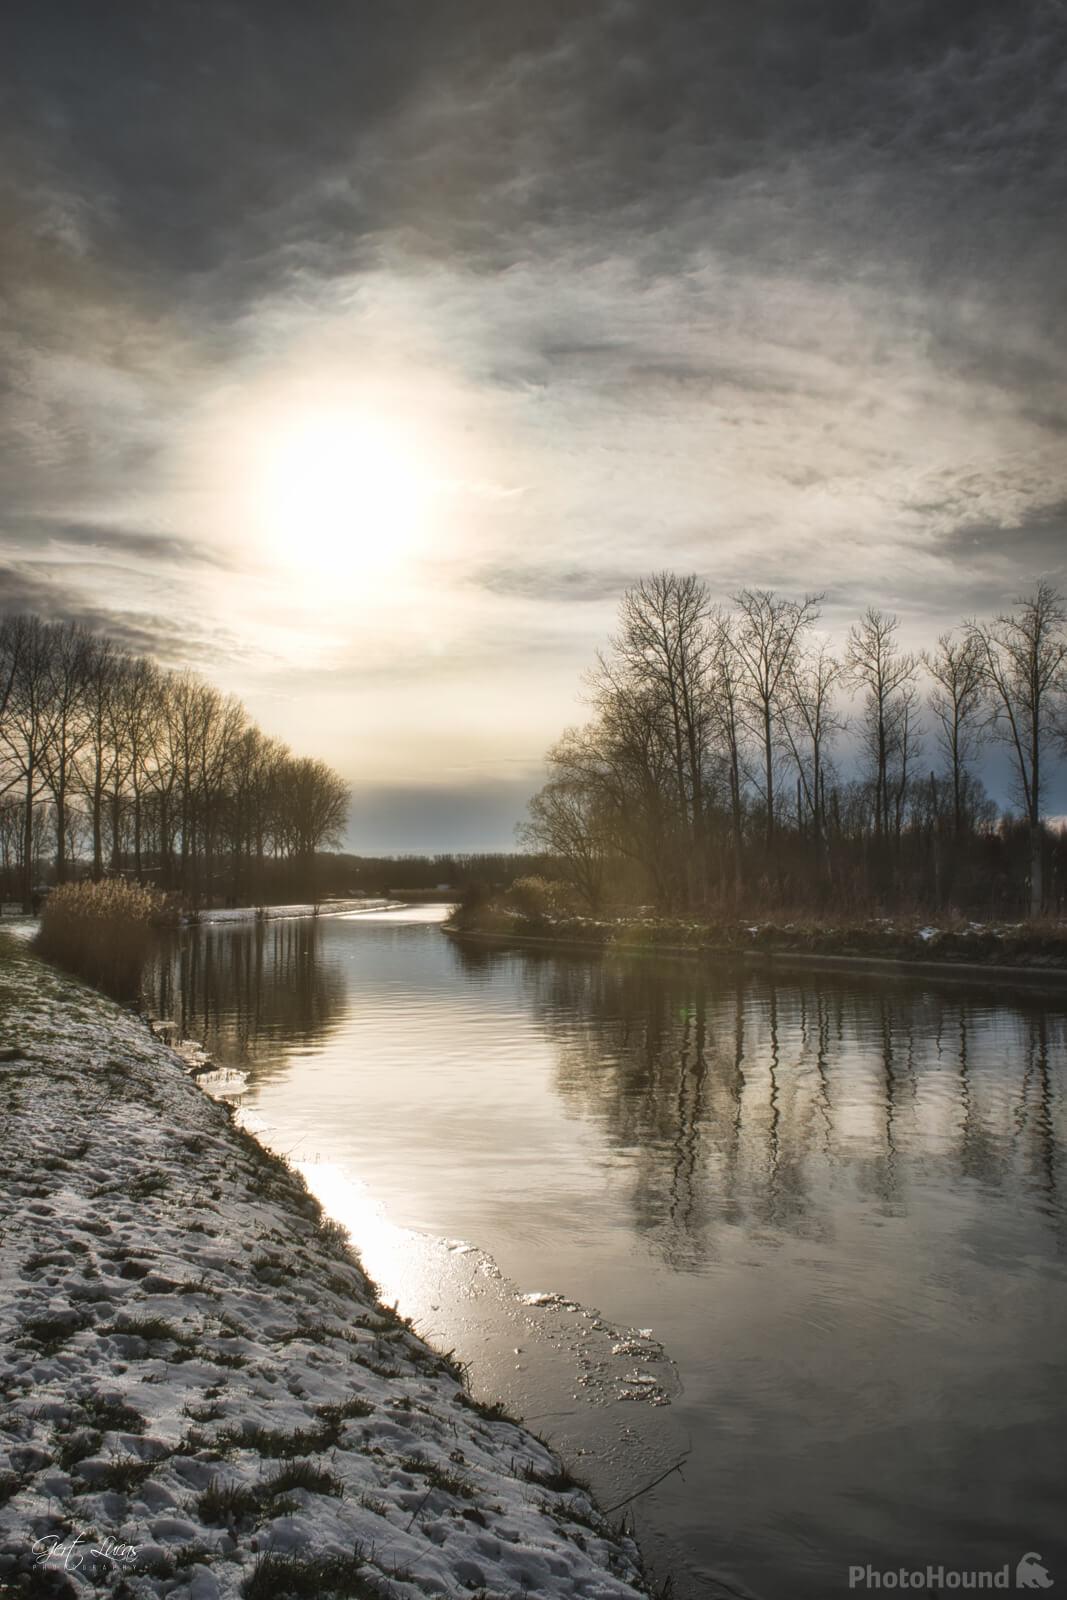 Image of Dender towpath by Gert Lucas